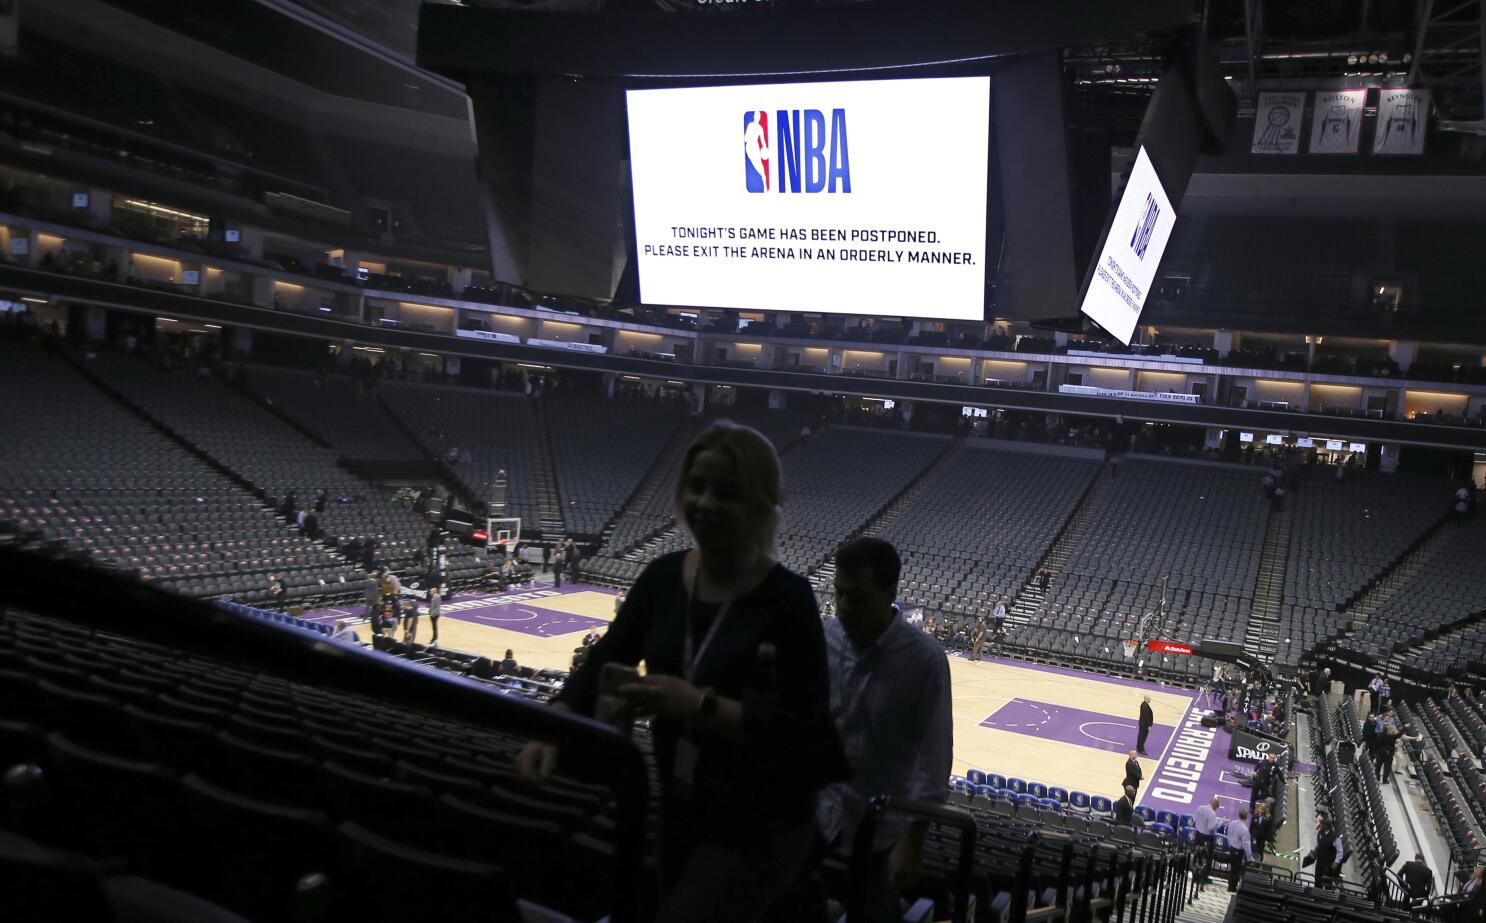 Coronavirus: NBA shuts down indefinitely after player tests positive